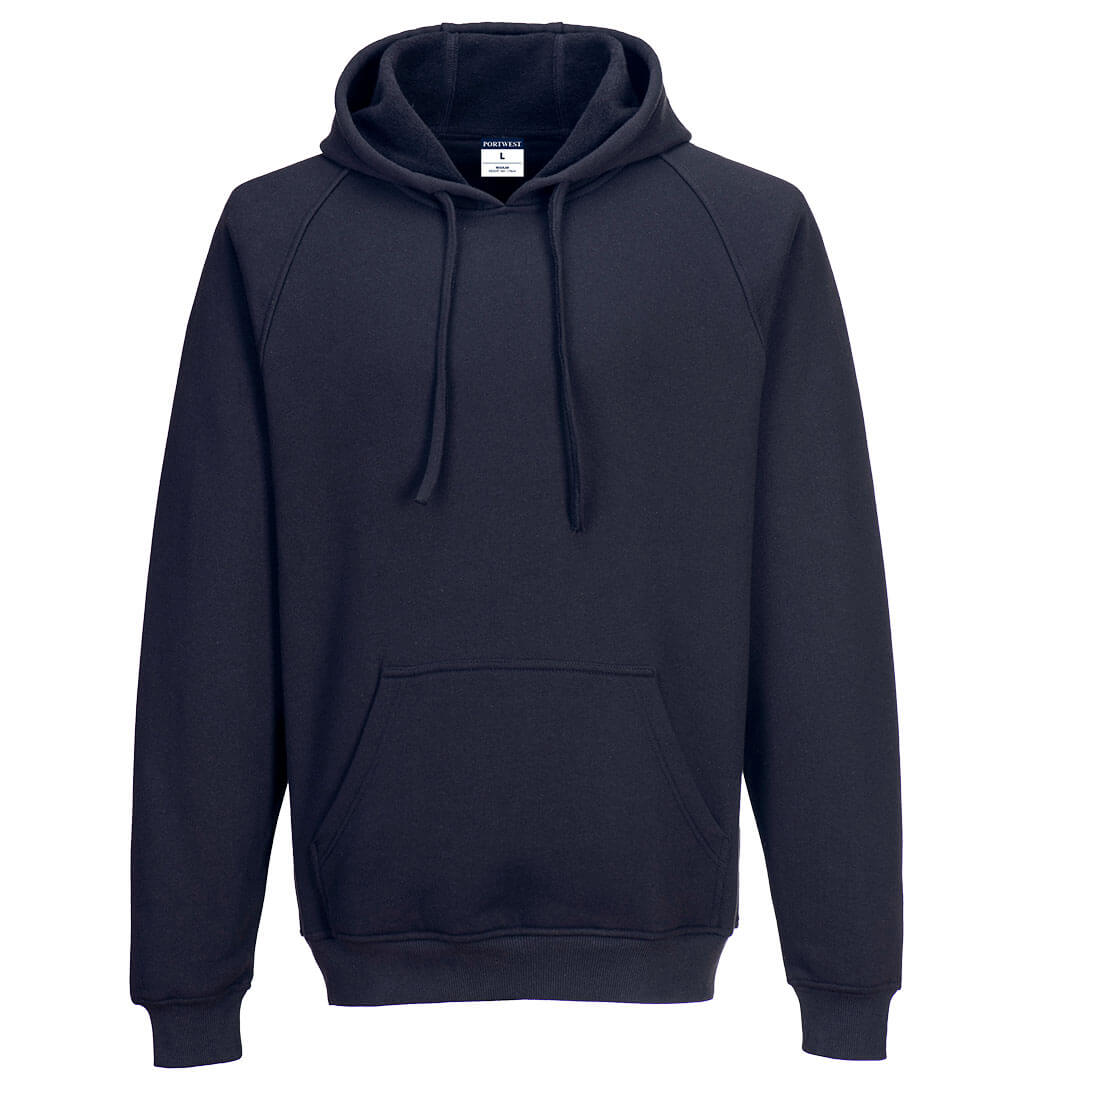 FR708 Portwest® Flame-Resistant Heavyweight Hooded Sweatshirts - navy